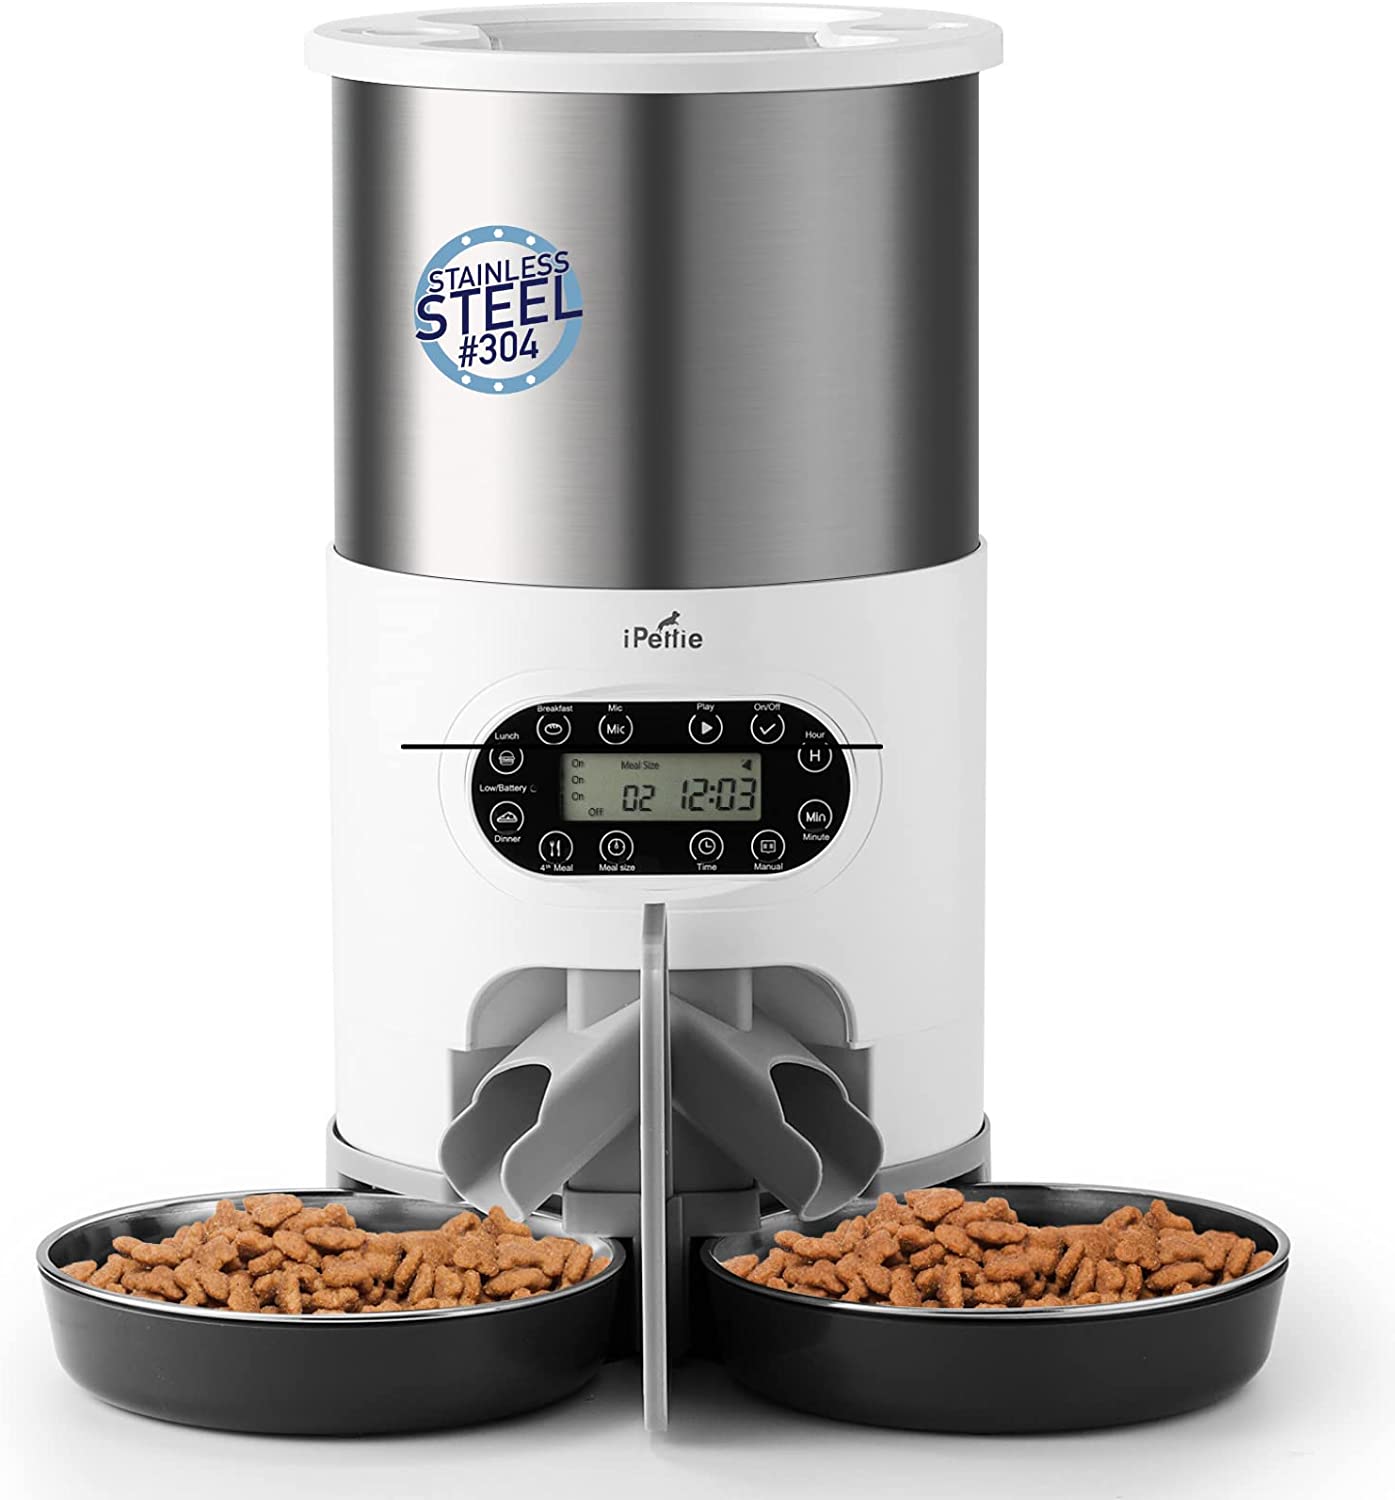 iPettie Automatic Pet Feeder for 2 Pets 4.5L 19.1cup Large Capacity Stainless Steel Pet Food Dispenser with Portion Control 1-4